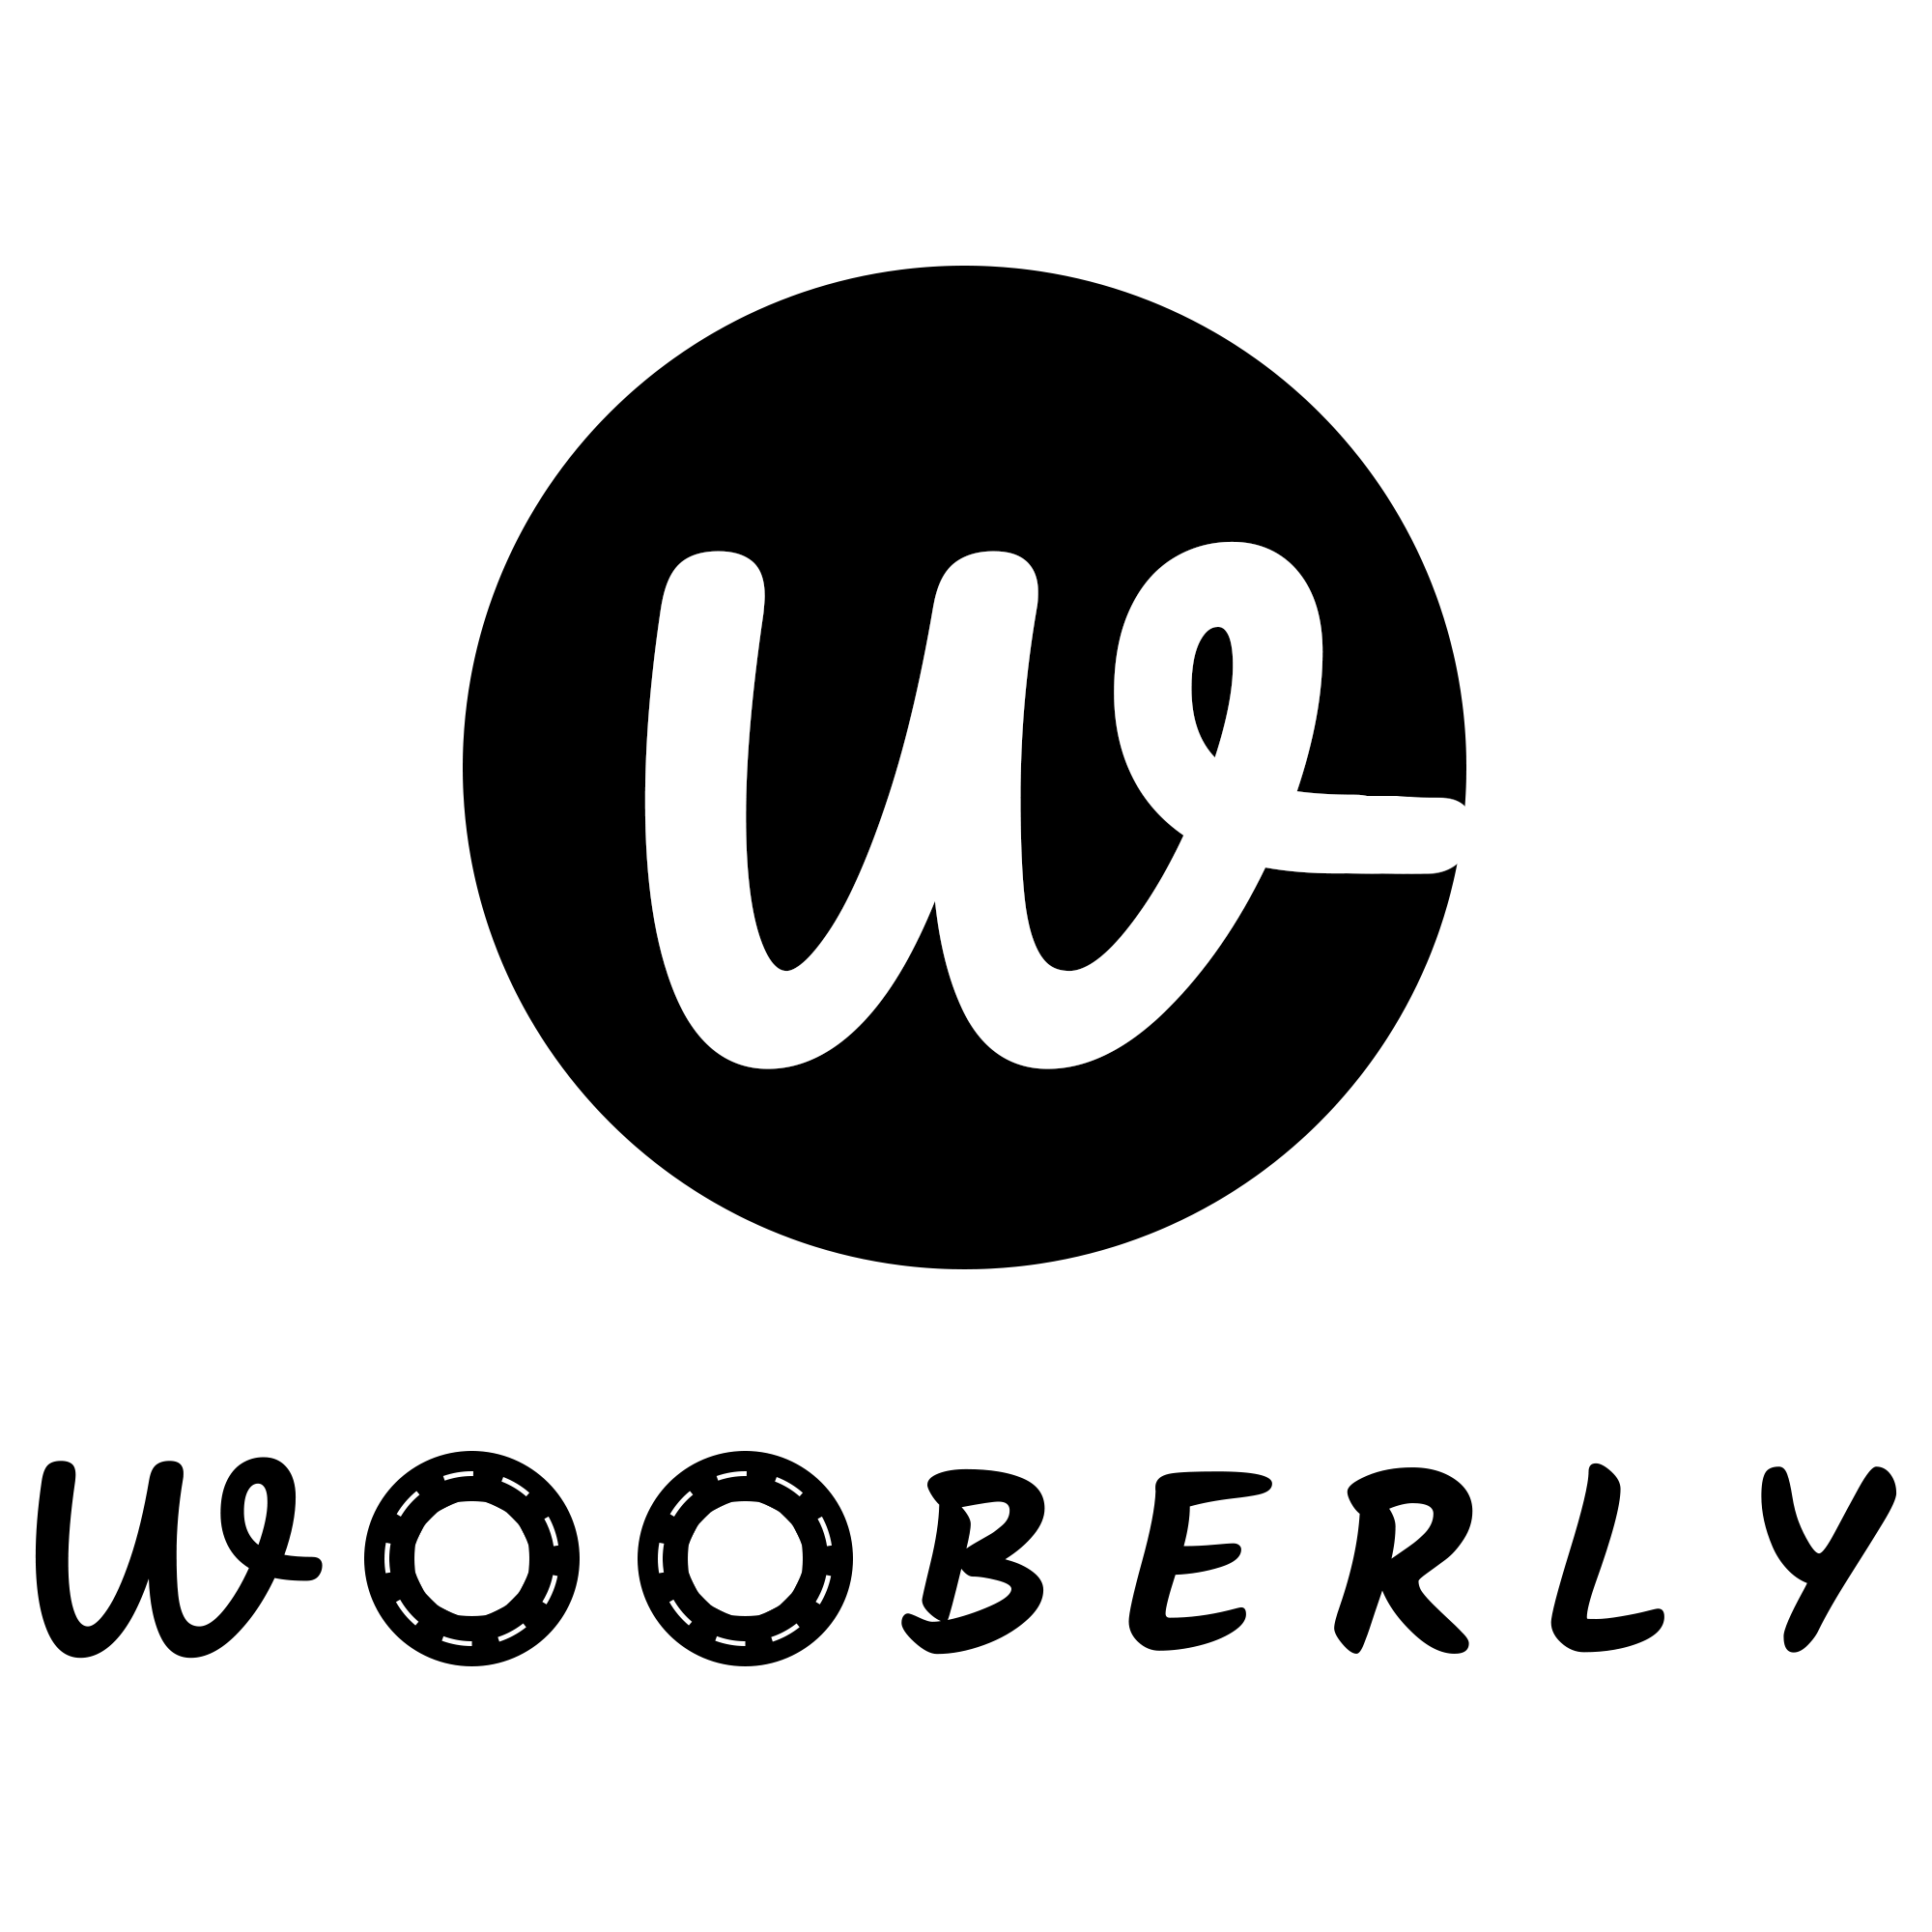 Wooberly - Uber clone app|Architect|Professional Services